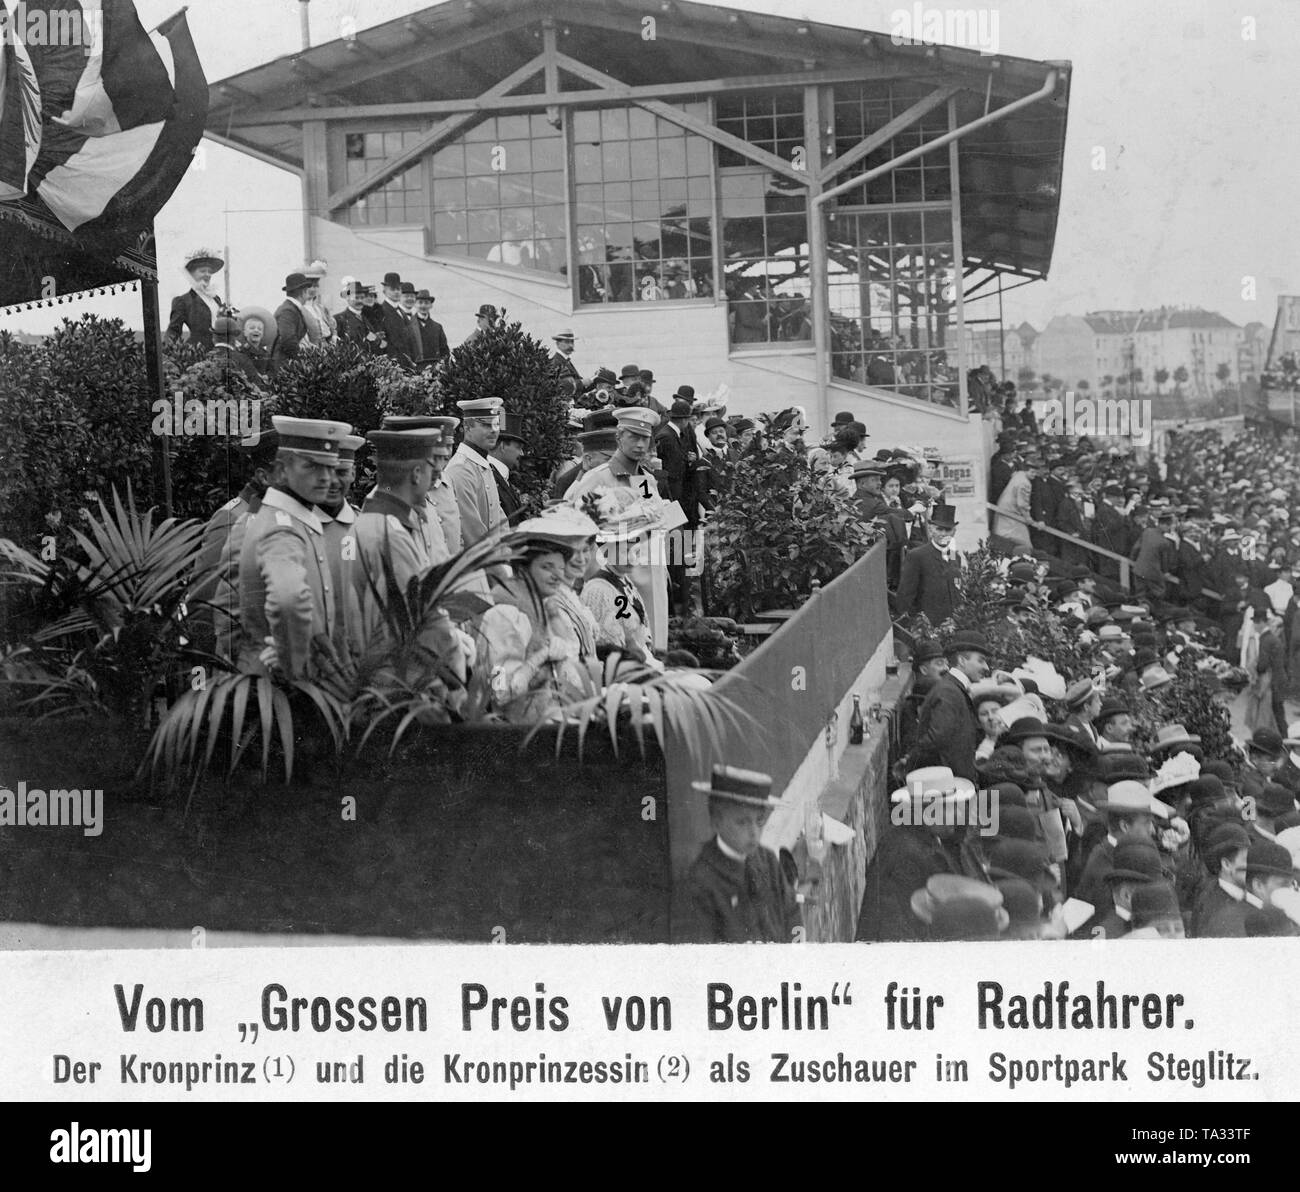 Crown Prince Wilhelm of Prussia and his wife Crown Princess Cecilie von Mecklenburg as spectators of the 'Grand Prix of Berlin' in the Sportpark Steglitz. Stock Photo